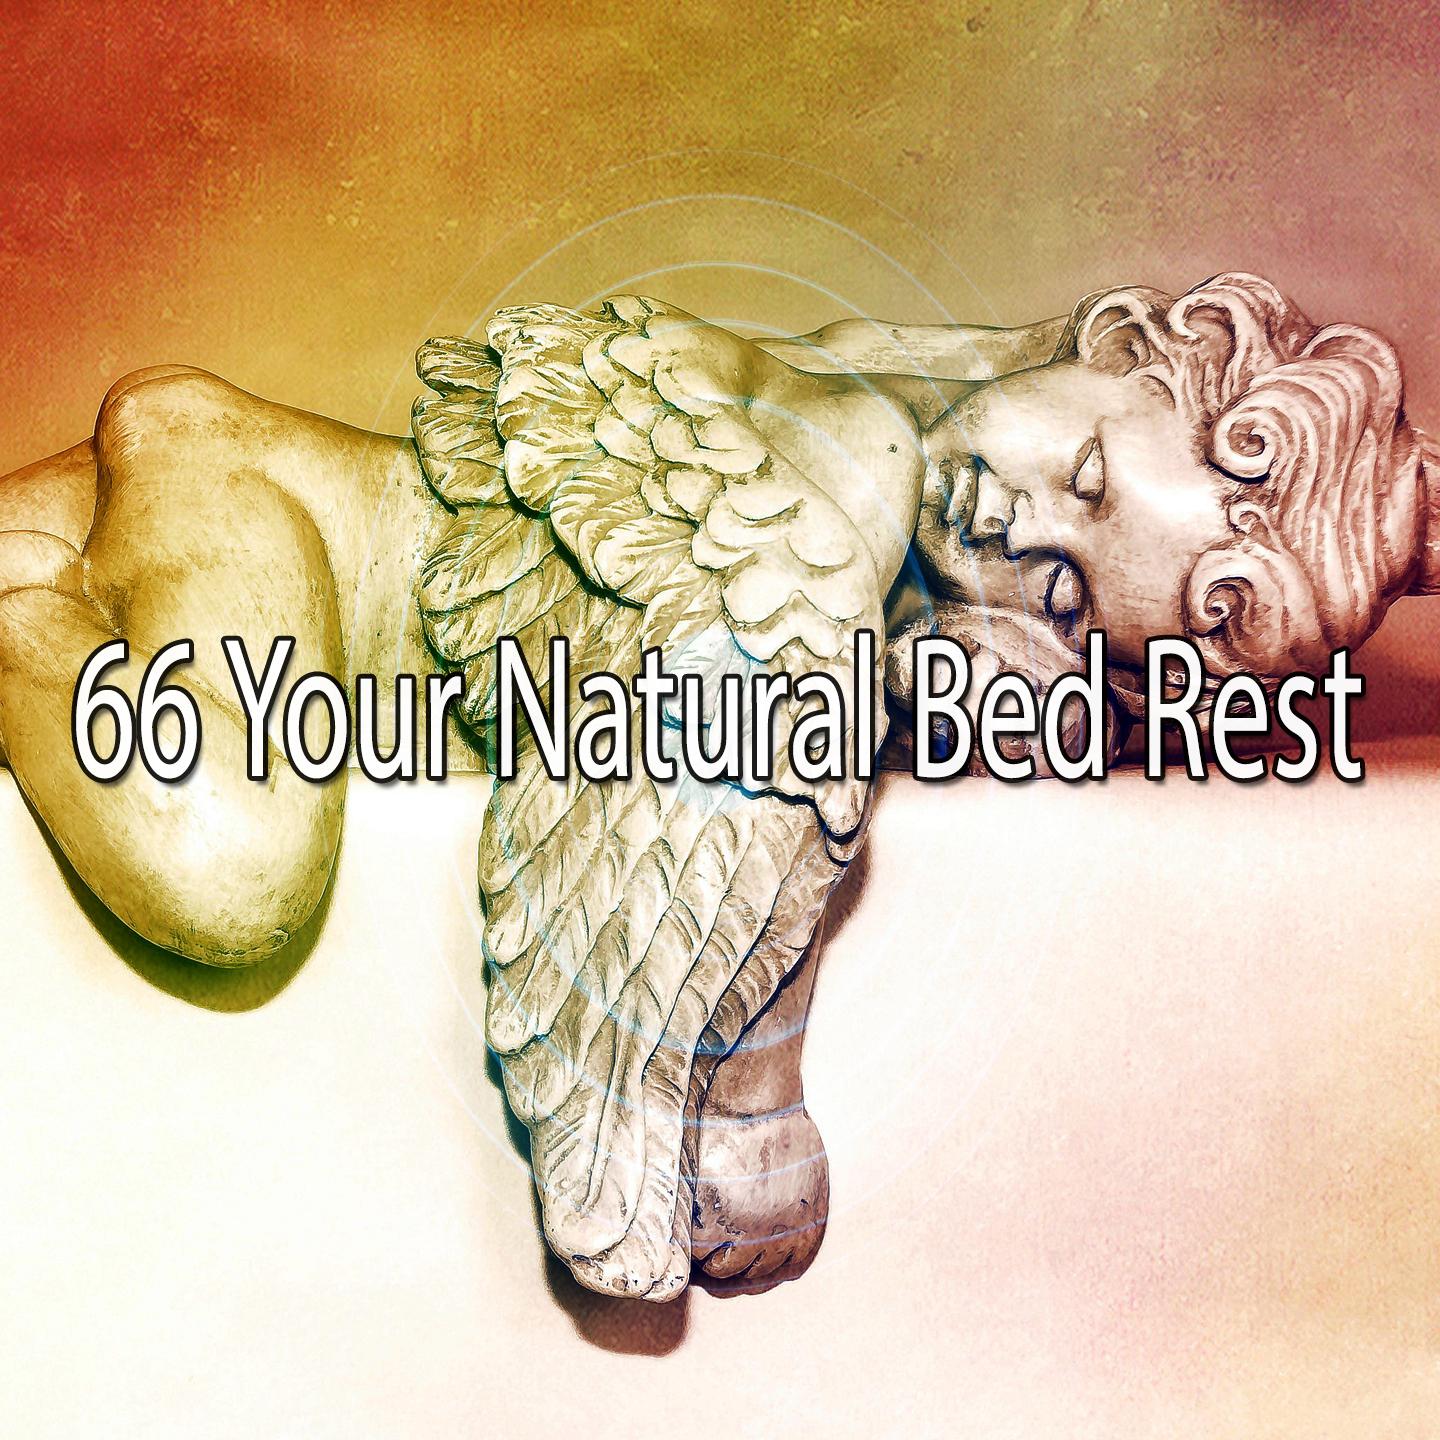 66 Your Natural Bed Rest